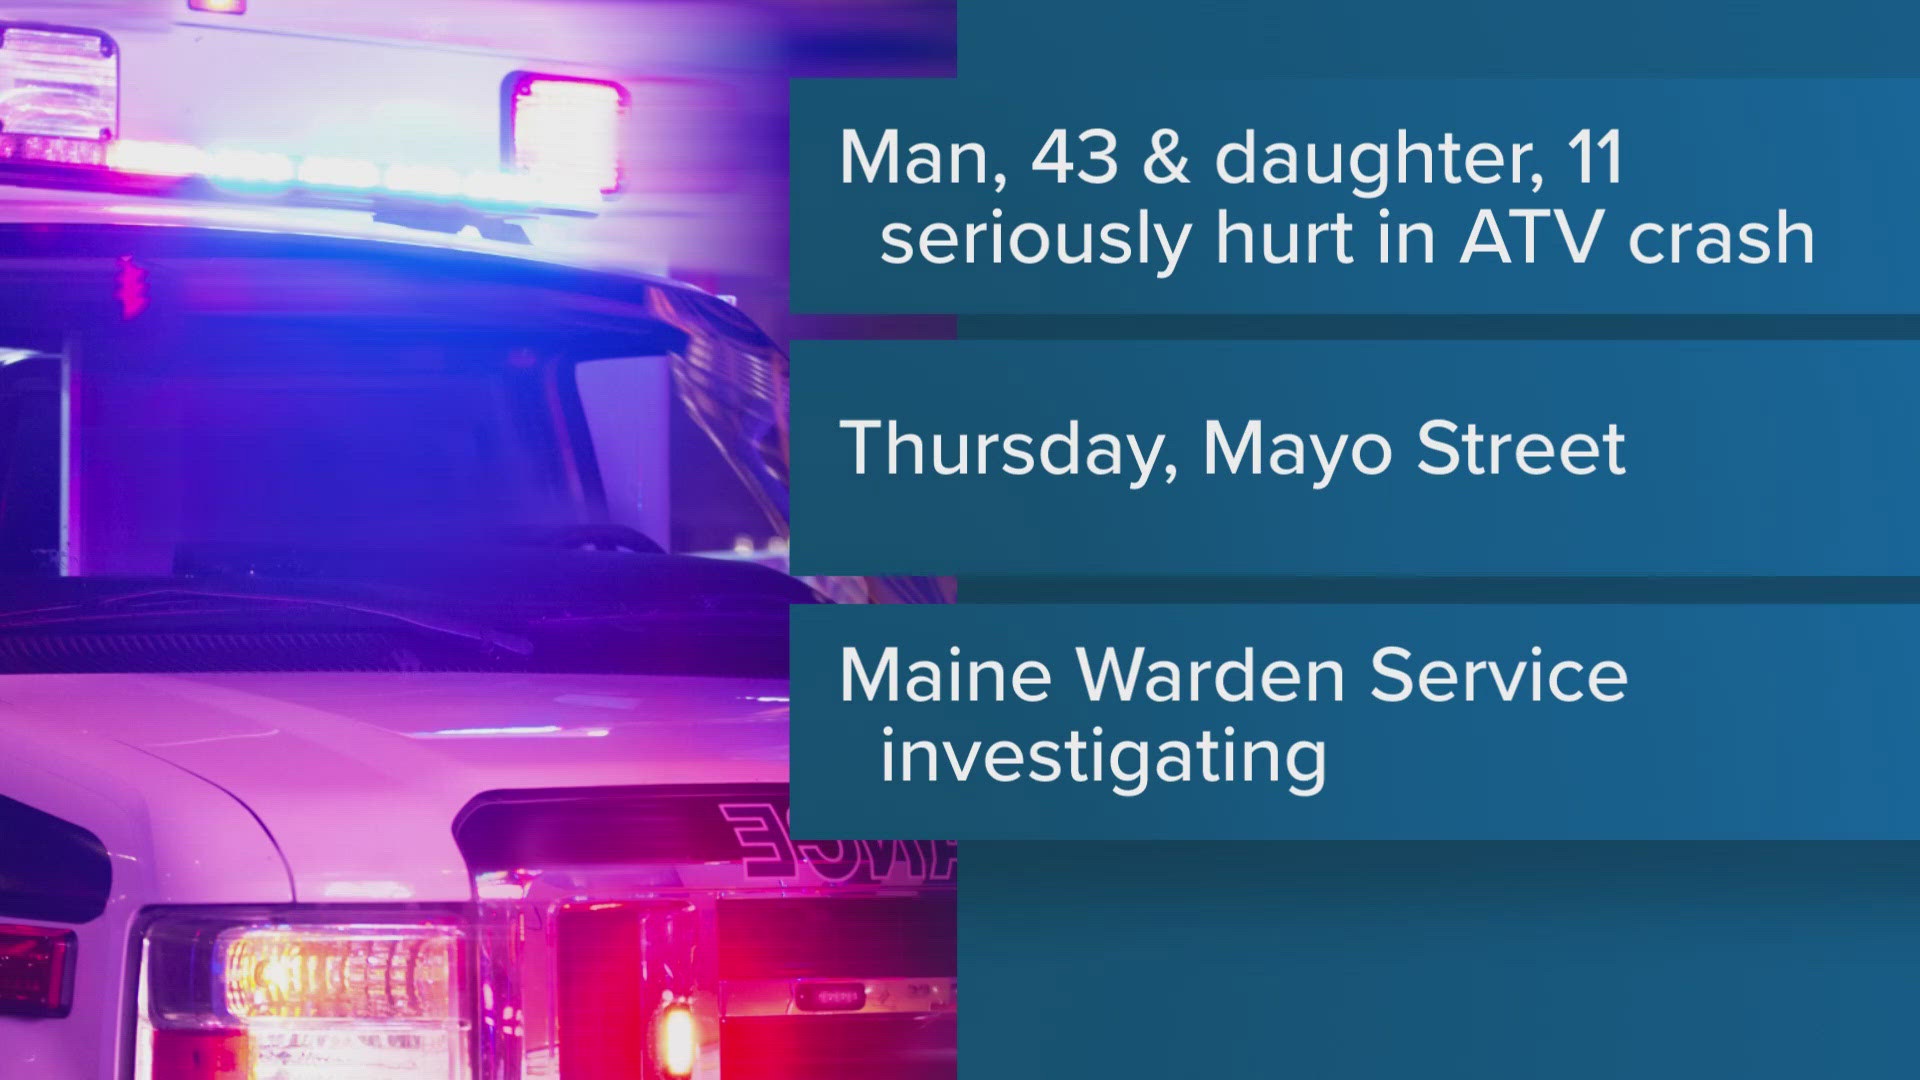 Both were taken to Mayo Hospital, and the daughter was later flown to Northern Light Eastern Maine Medical Center, police said.